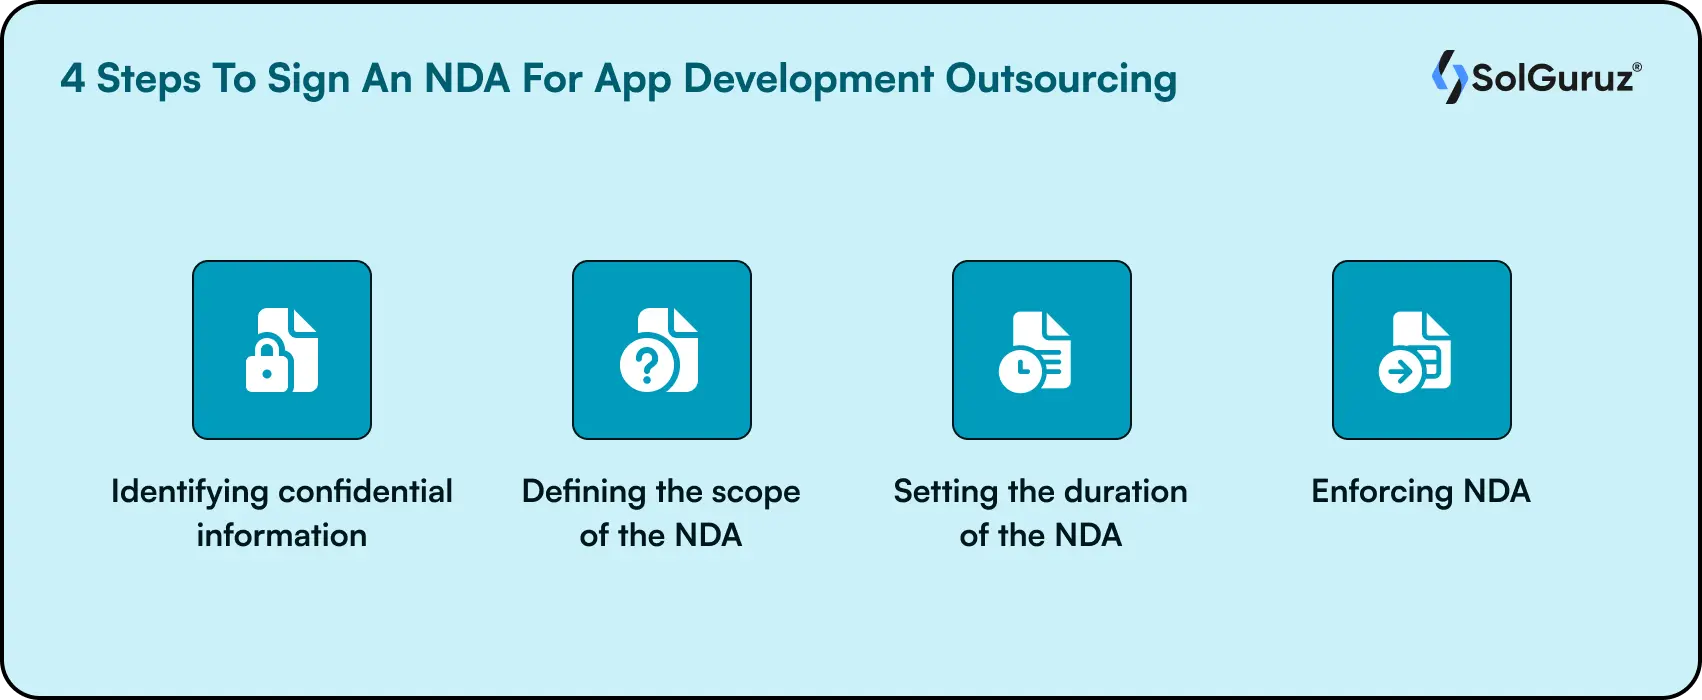 4 Steps To Sign An NDA For App Development Outsourcing